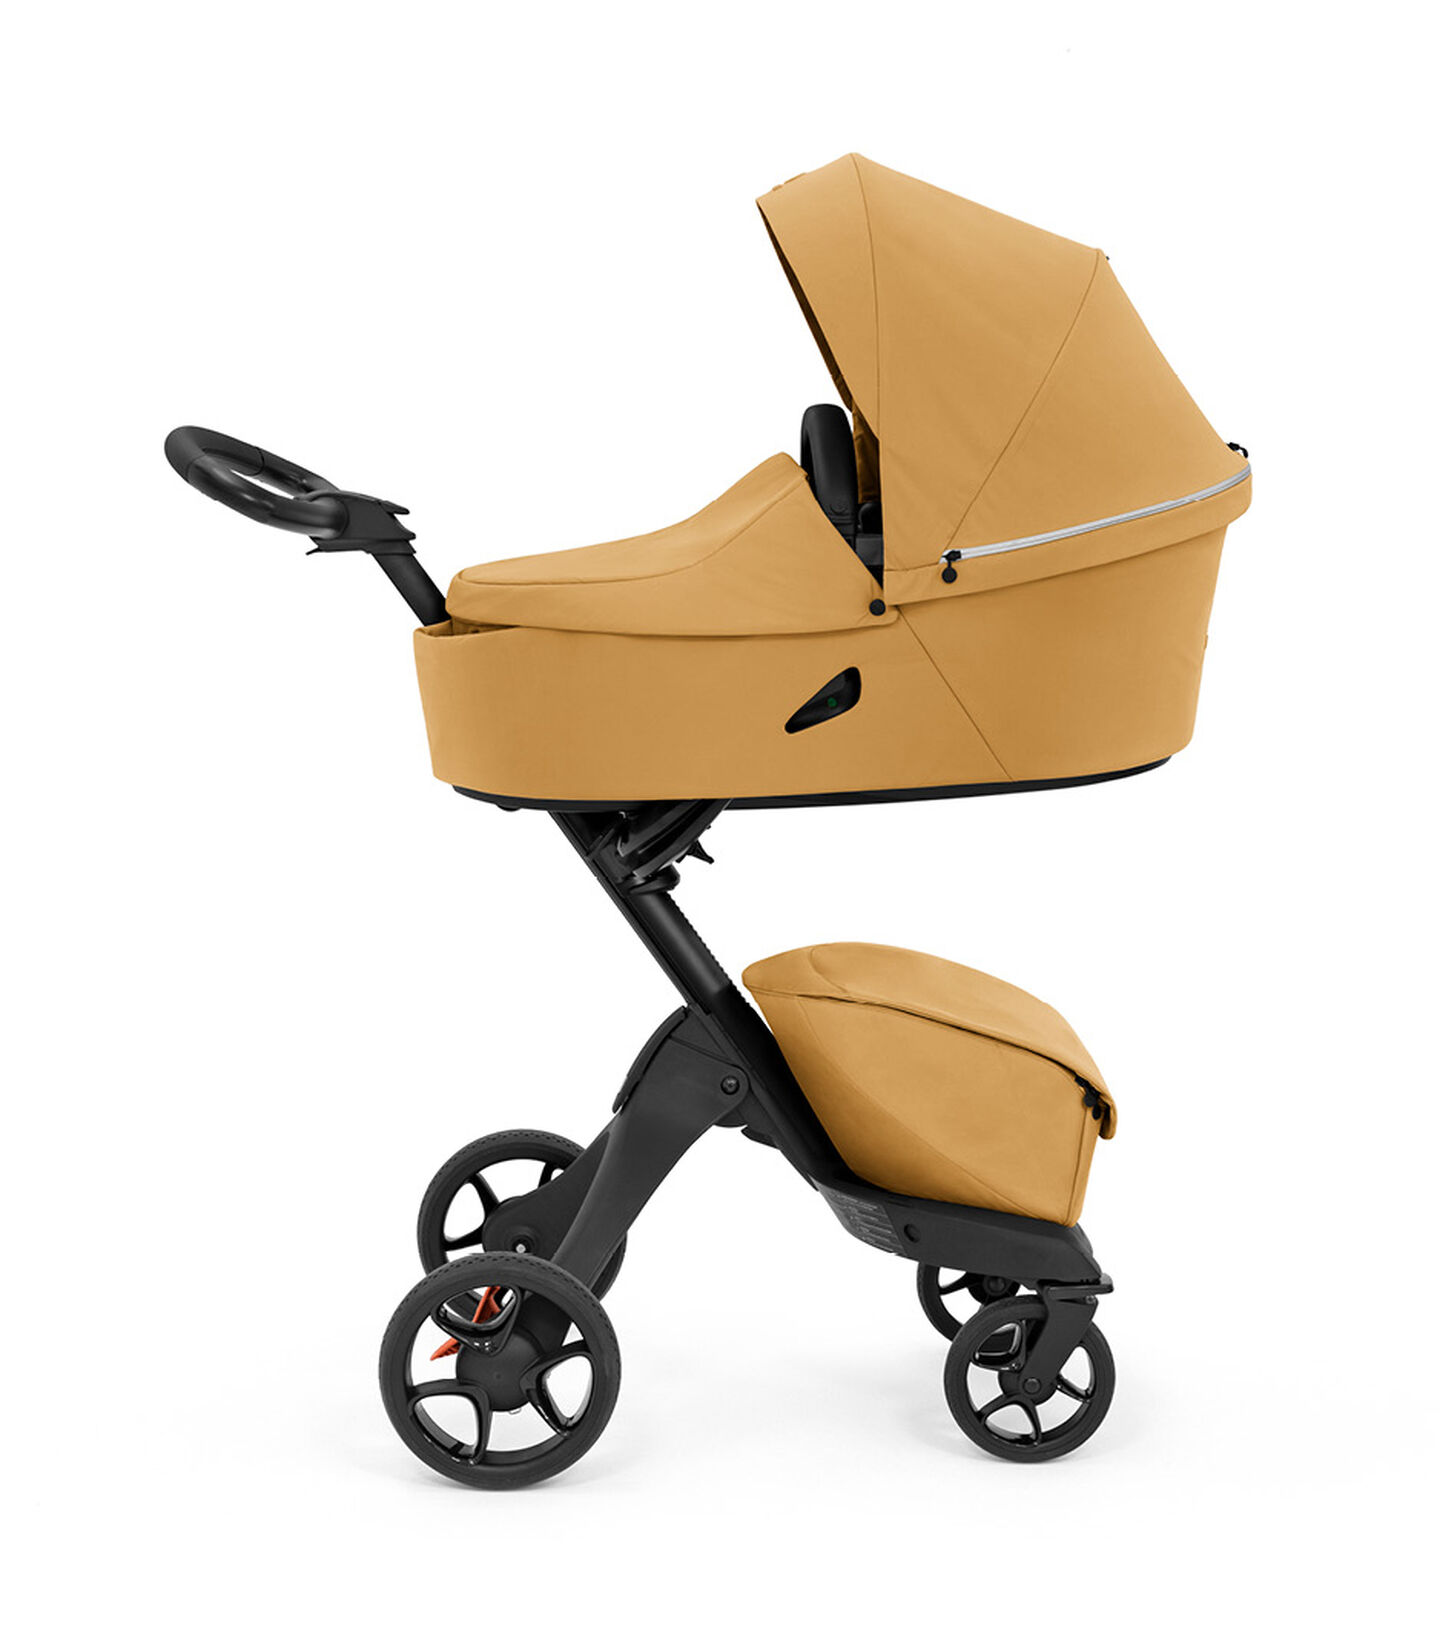 Stokke® Xplory® Liggedel Golden Yellow, Golden Yellow, mainview view 2